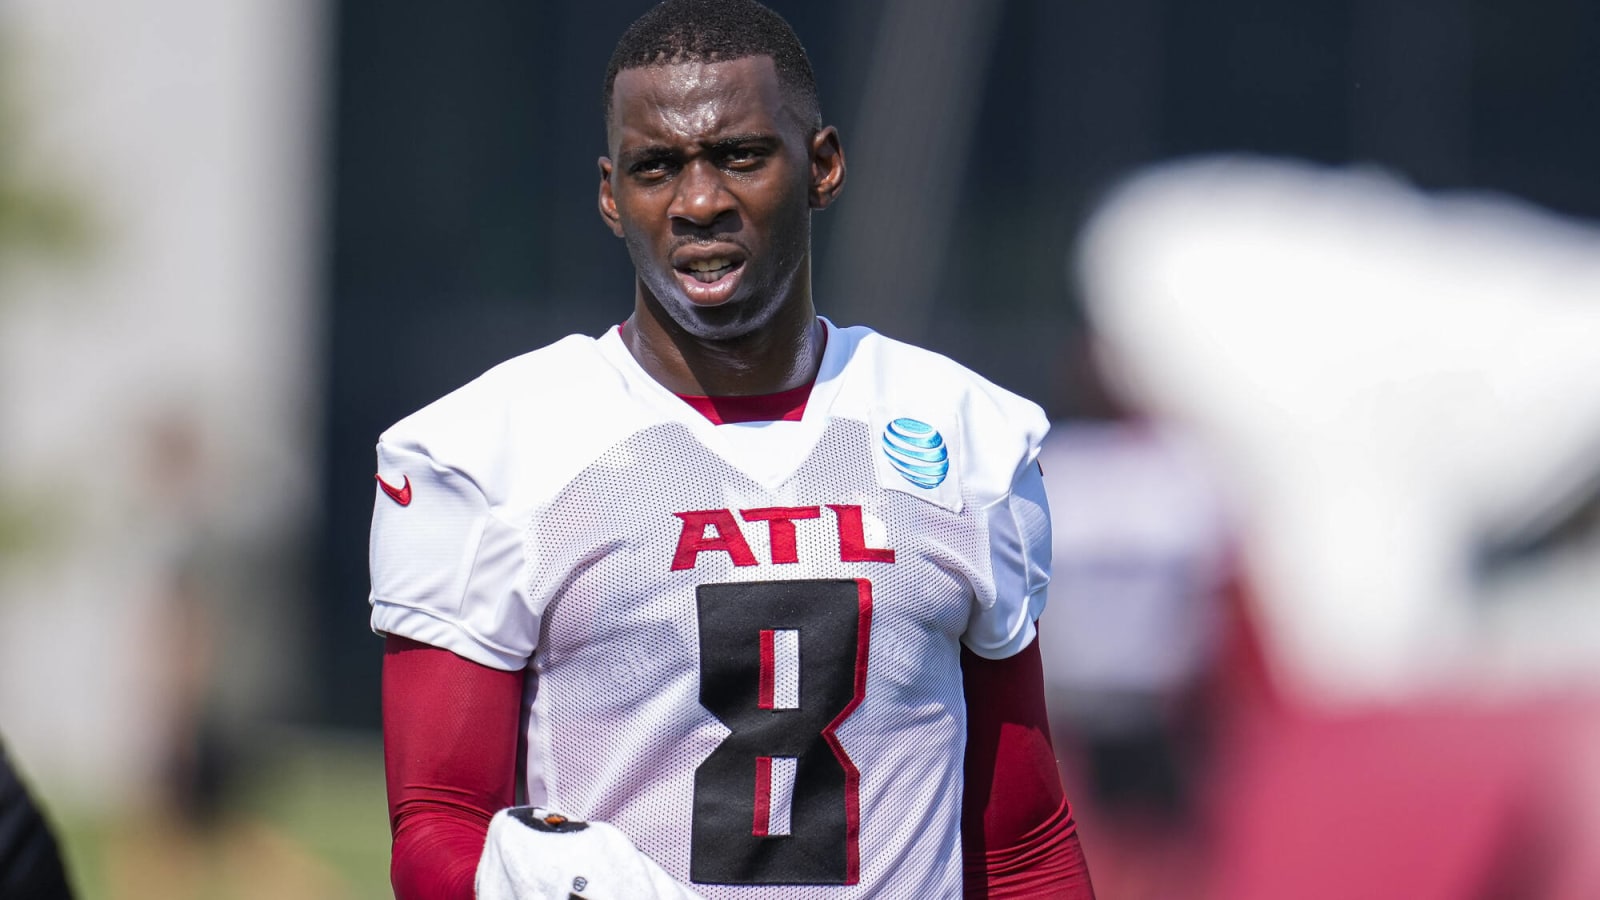 Falcons star appears on The Athletics’s top players 25 and under list